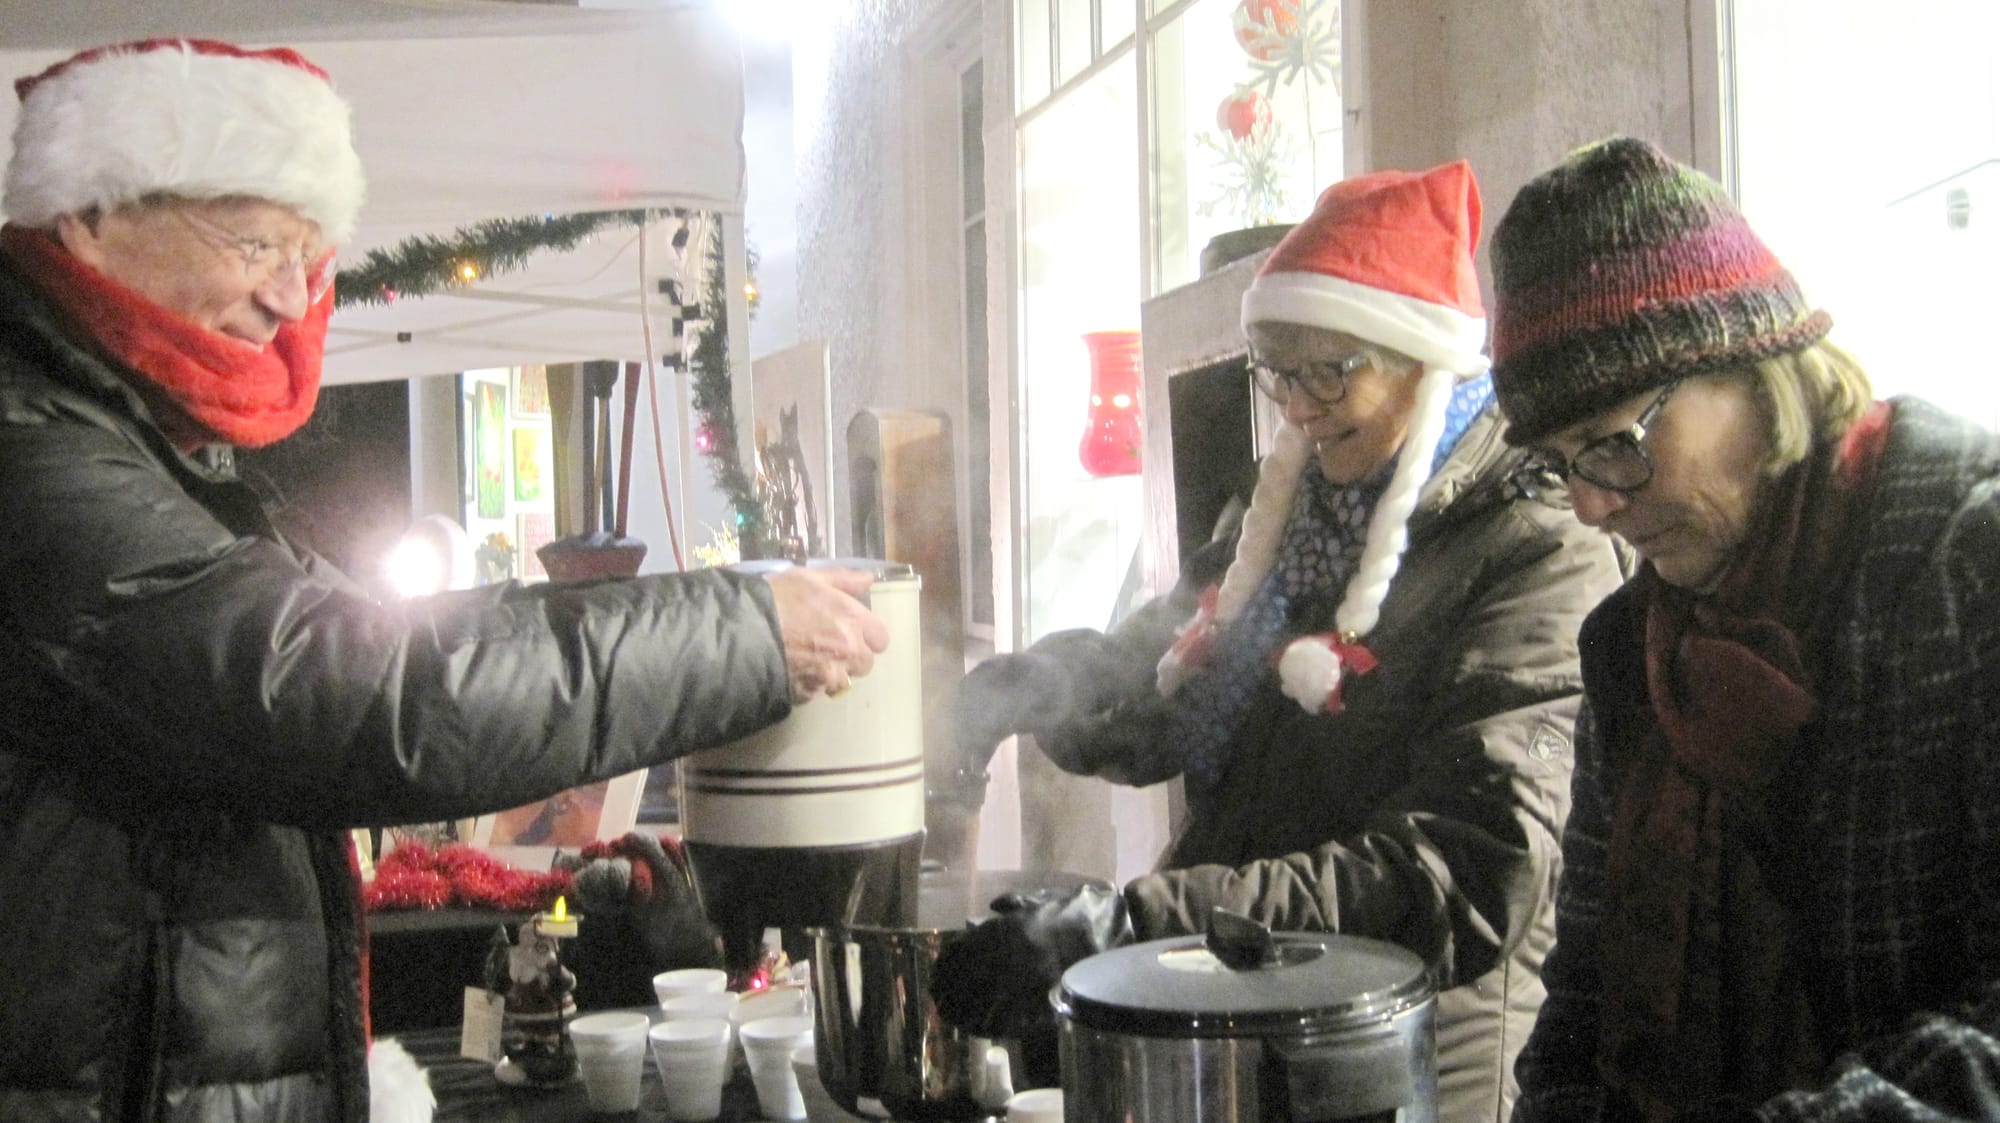 Image of people at the Gallery's Christmas market enjoying their complimentary hot chocolate.